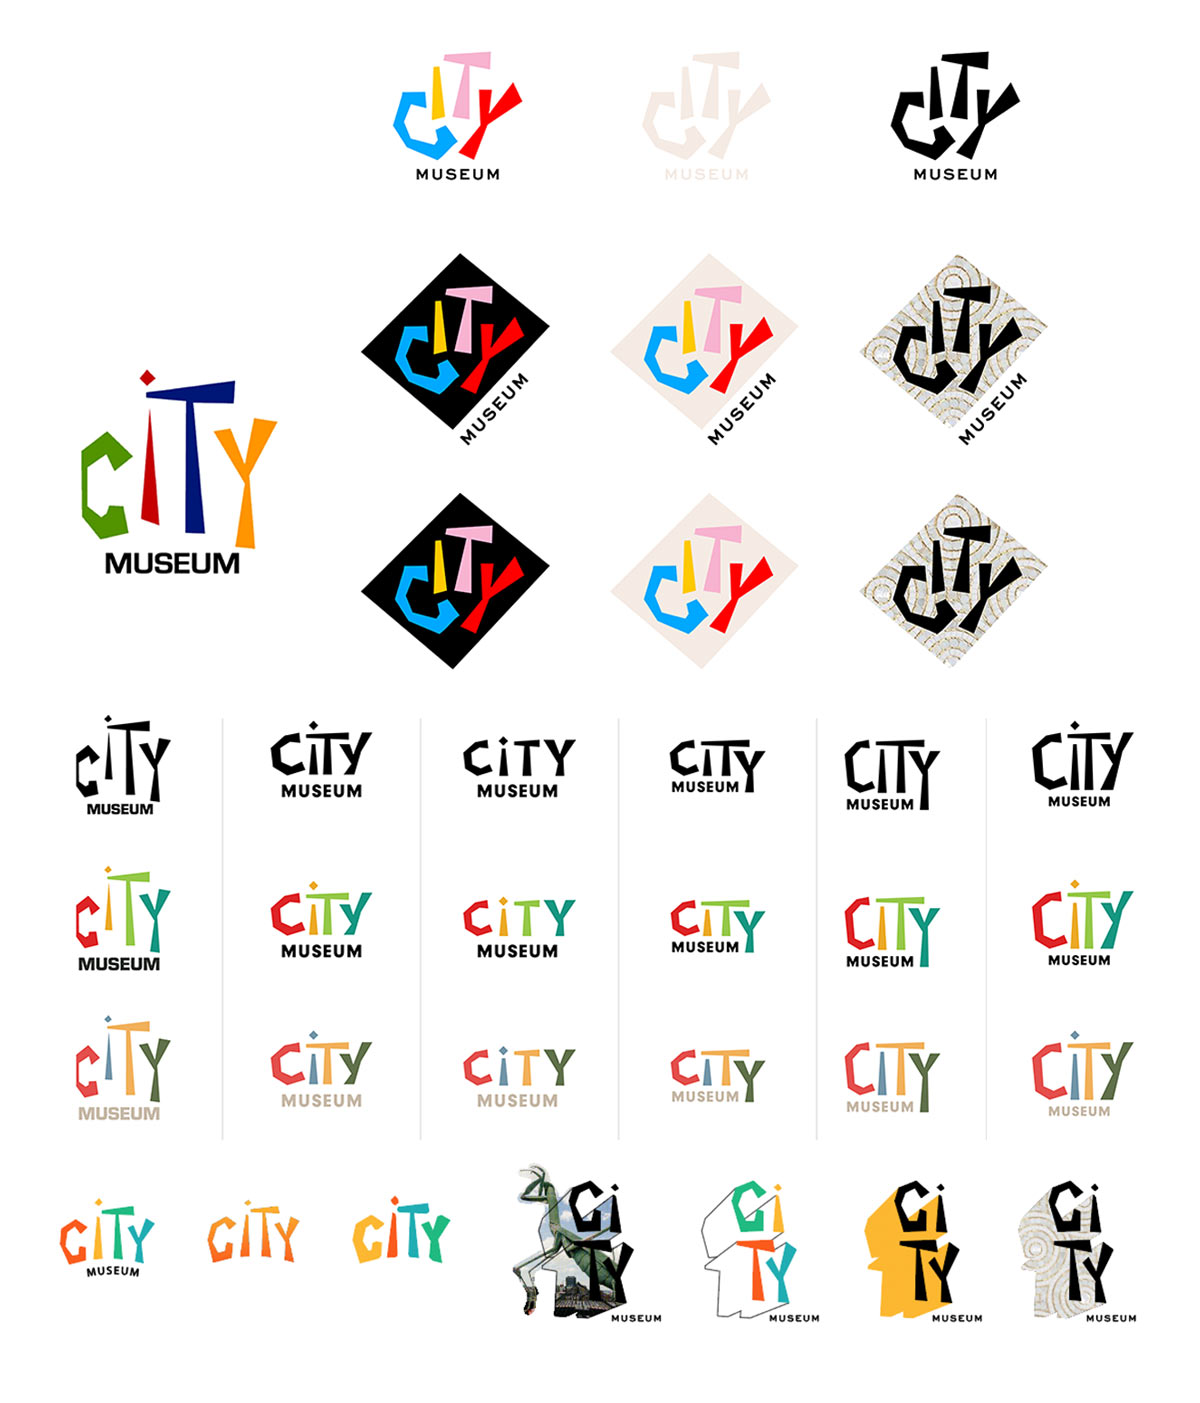 City Museum logo exploration showing experimenting with type and color